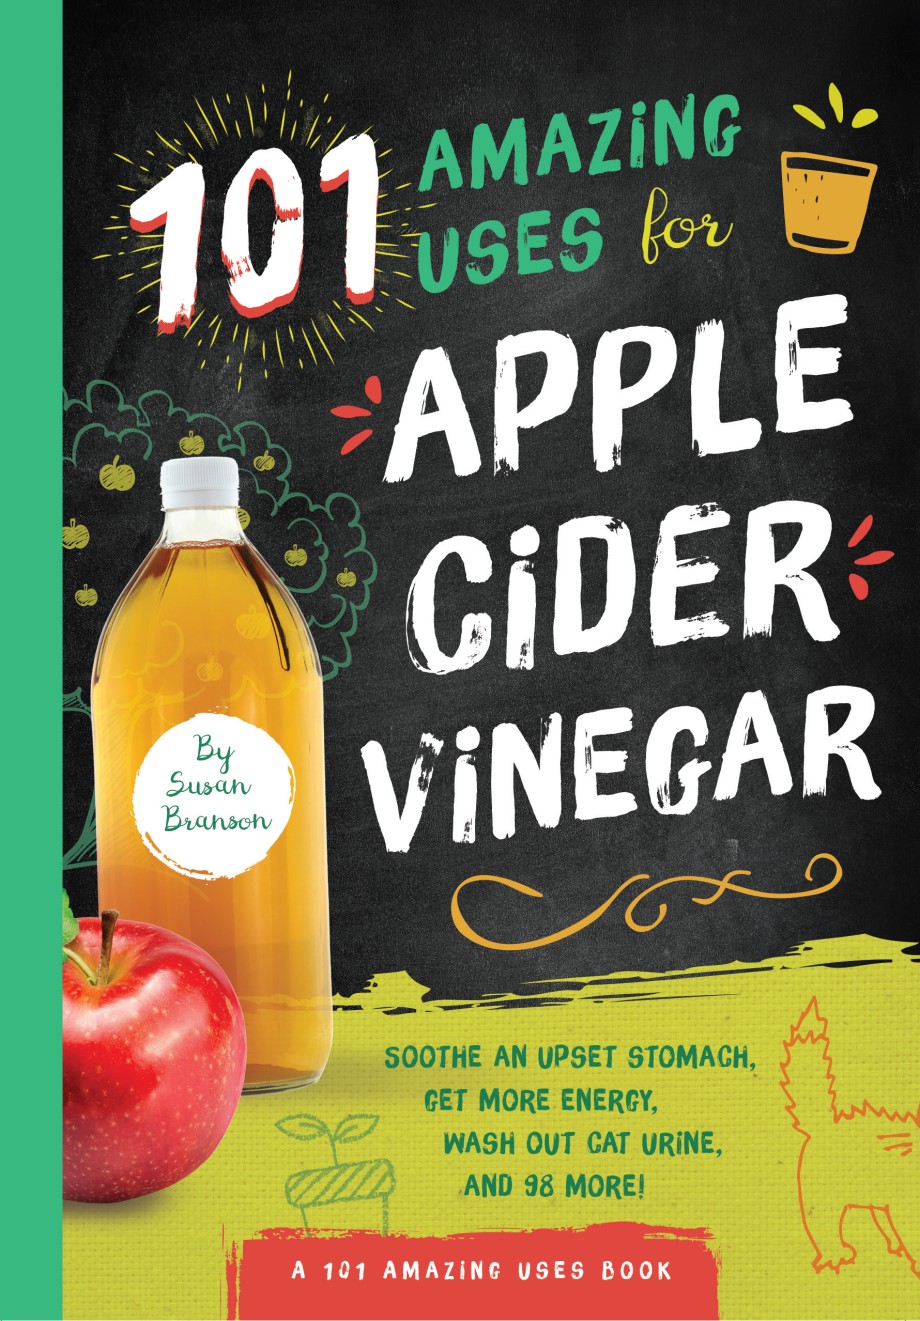 101 Amazing Uses for Apple Cider Vinegar Soothe An Upset Stomach, Get More Energy, Wash Out Cat Urine and 98 More!